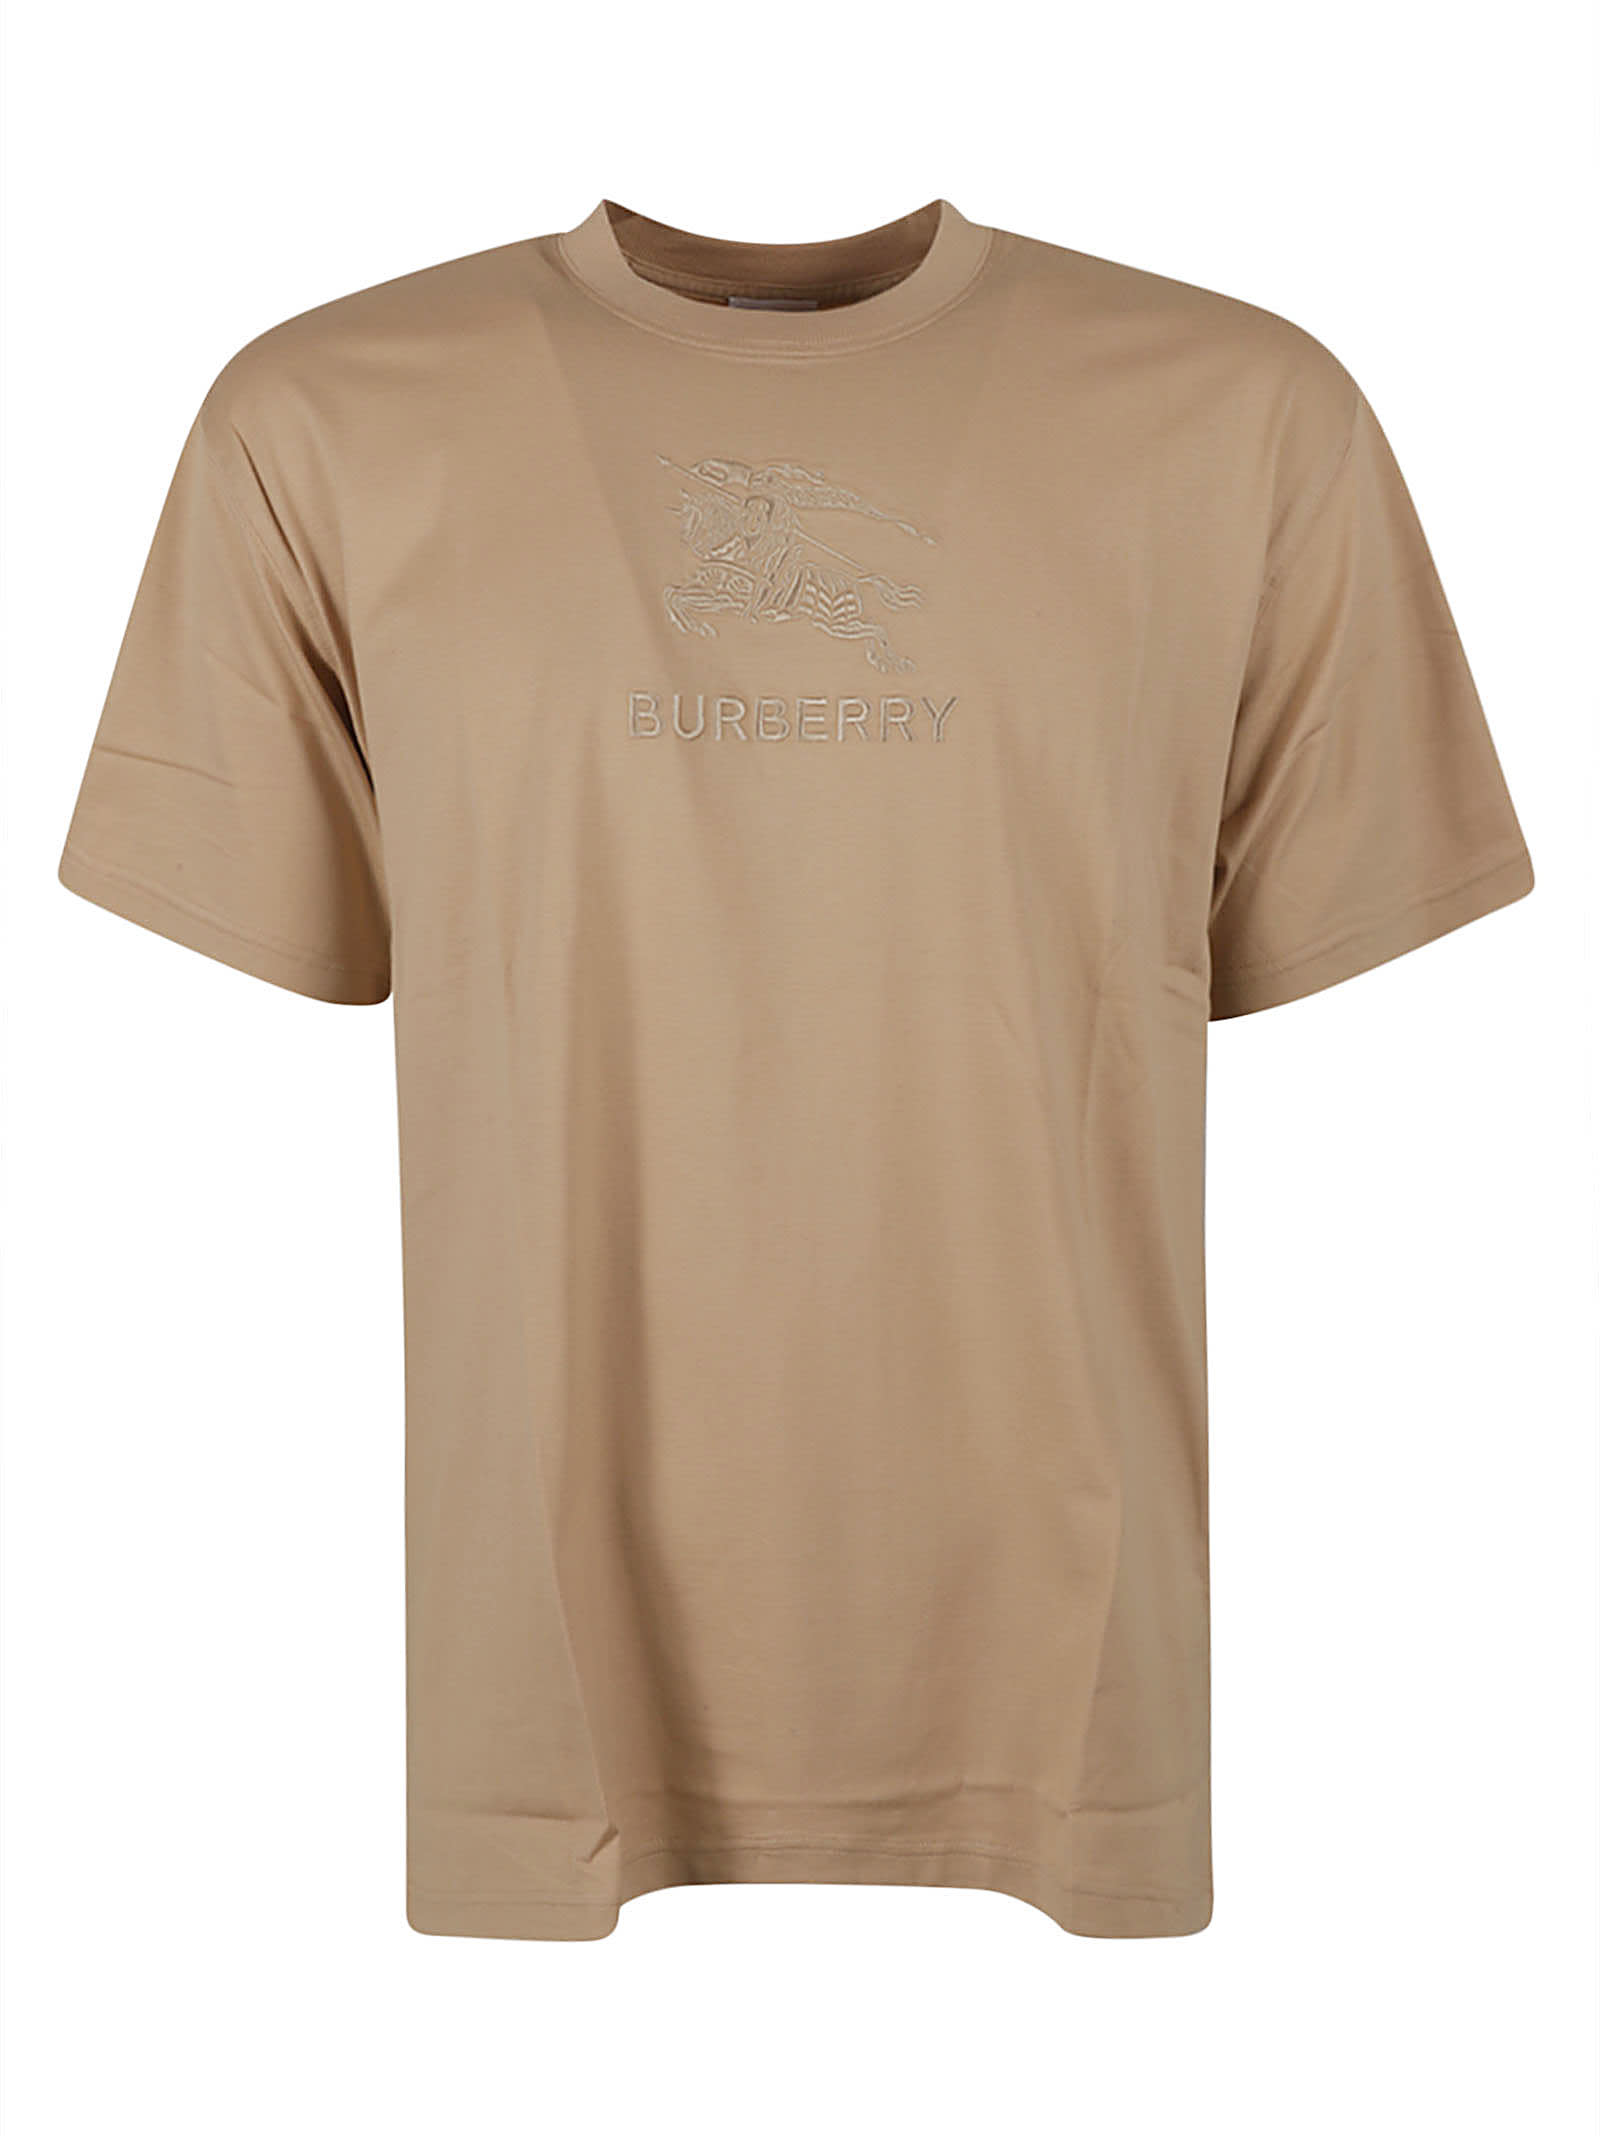 Burberry Logo Round Neck T-shirt In Soft Fawn